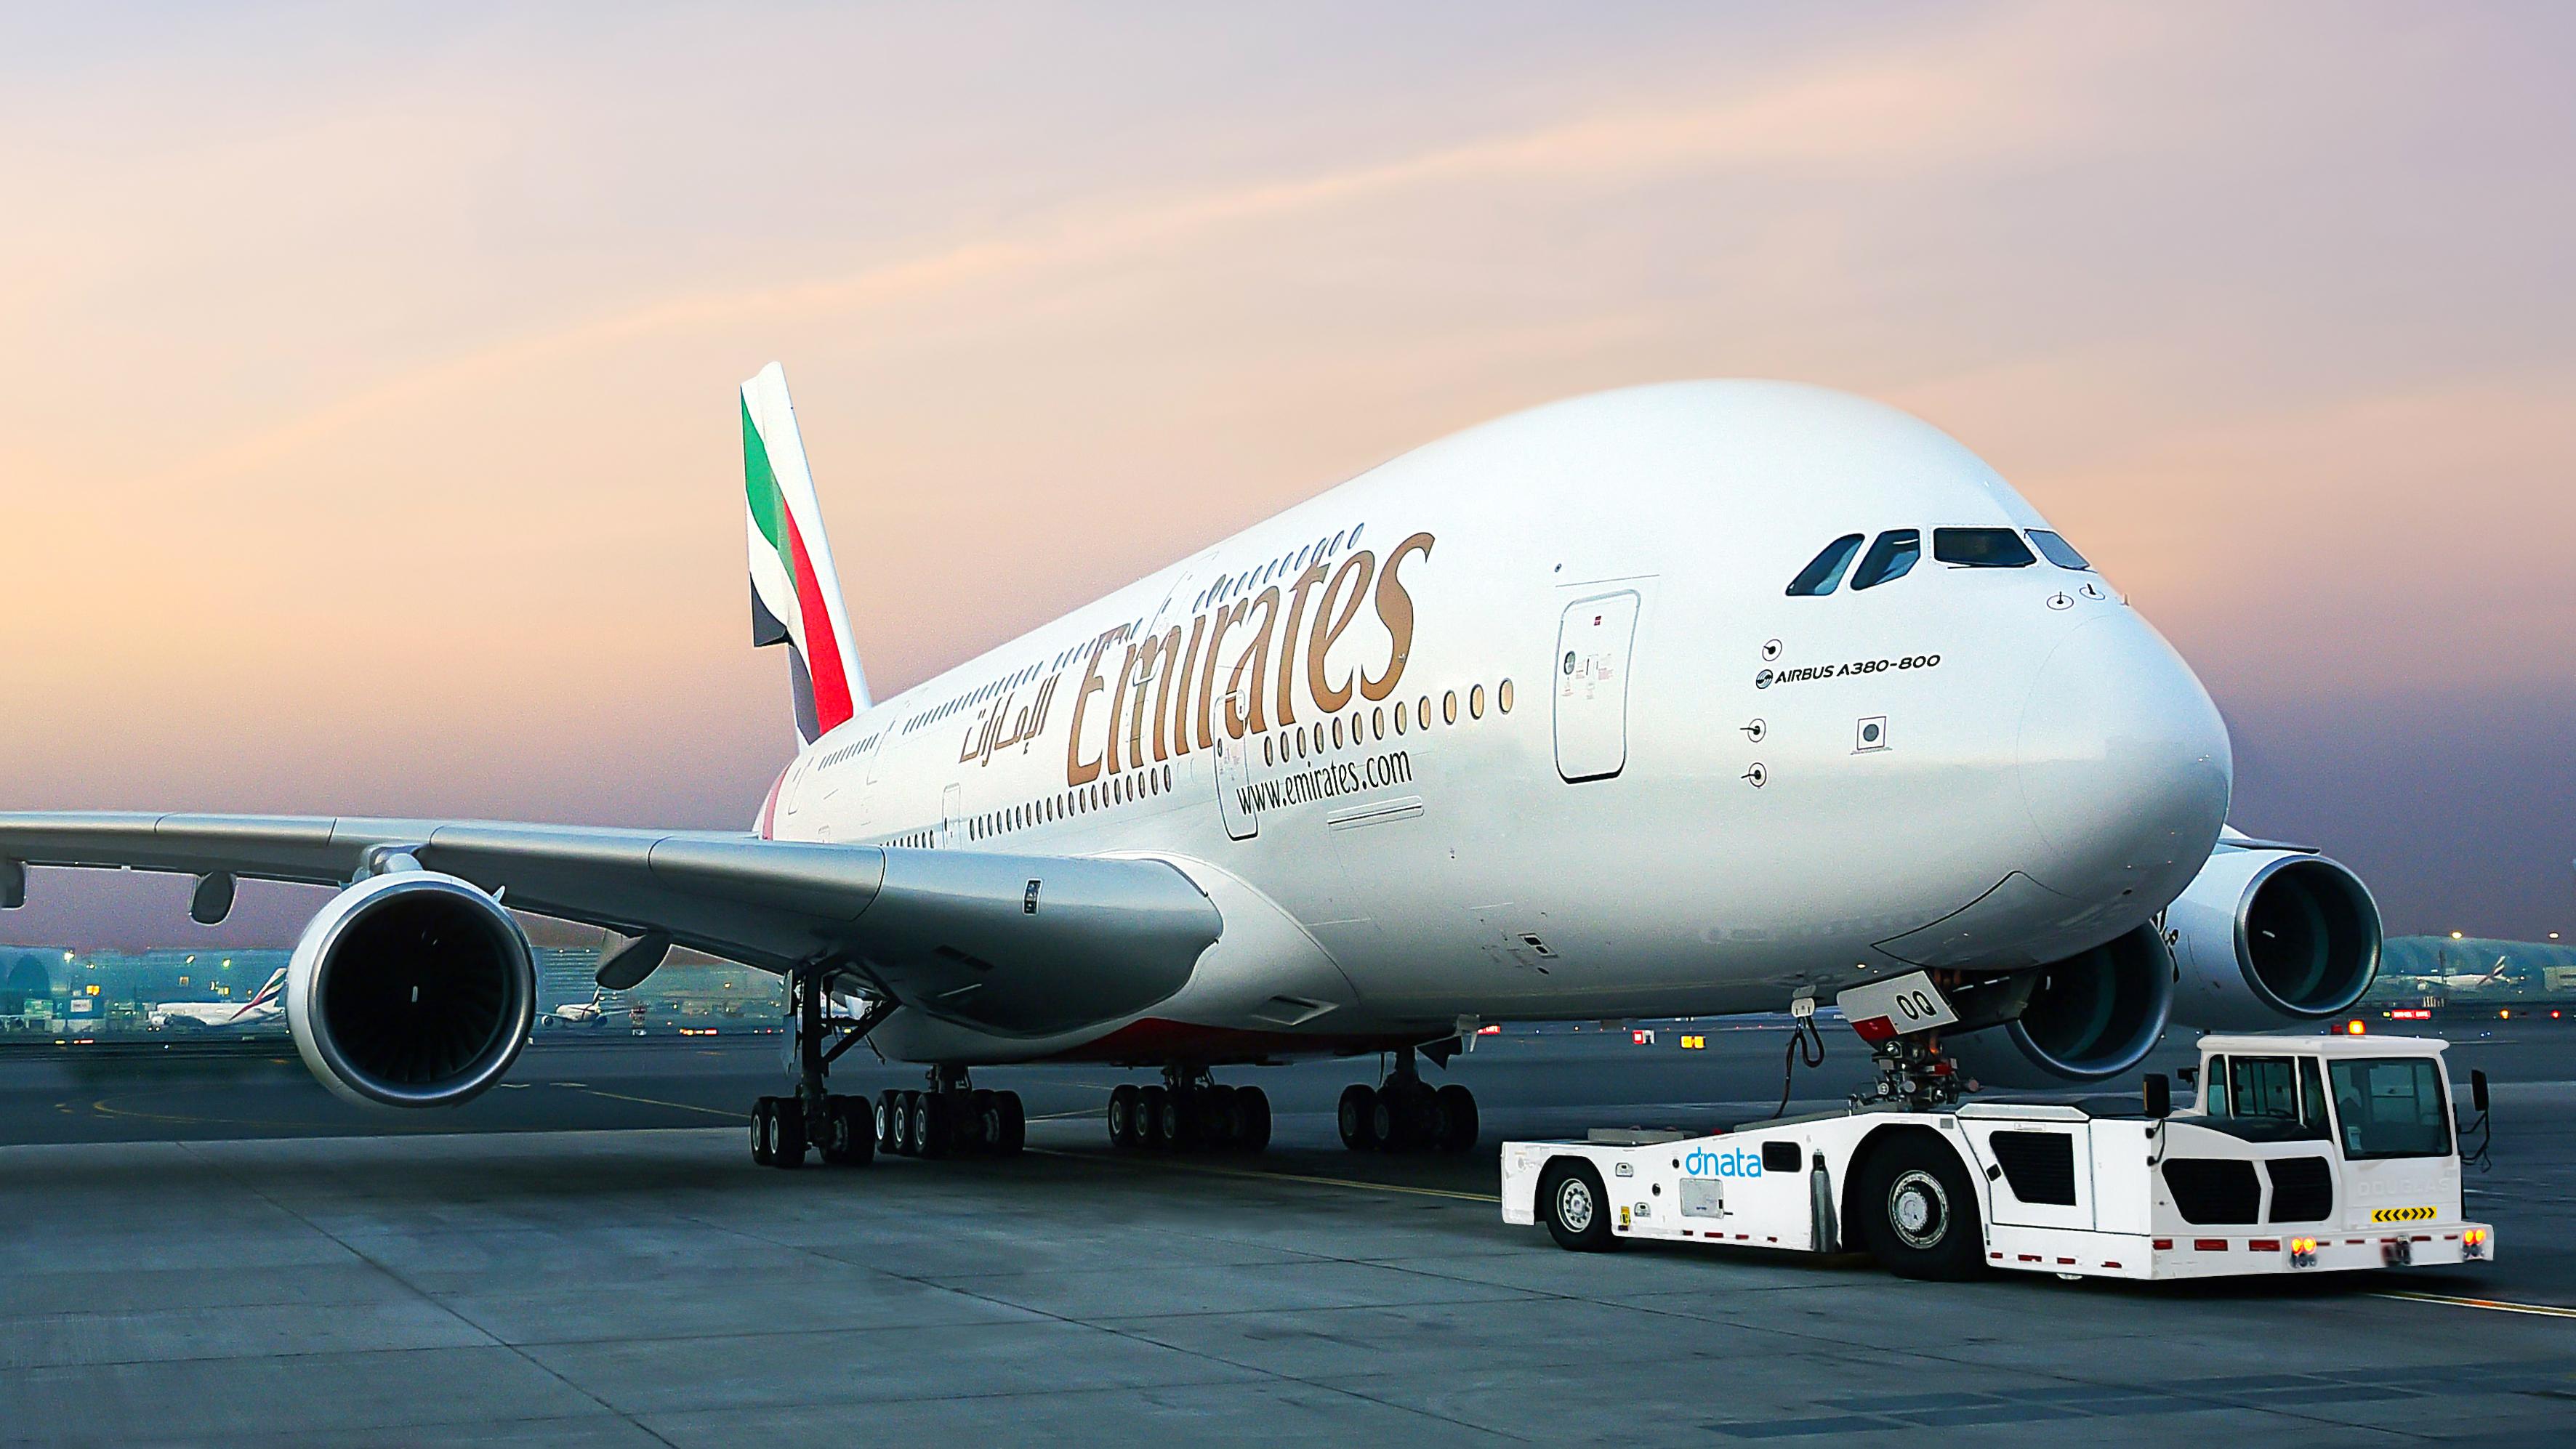 Emirates Airline on Twitter: &quot;The Emirates Group has announced its financial results for 2020-21, its first non-profitable year in over three decades, due to the COVID-19 pandemic impact. https://t.co/pAhEZKK3hi https://t.co/pRE7NmTcxB&quot; / Twitter